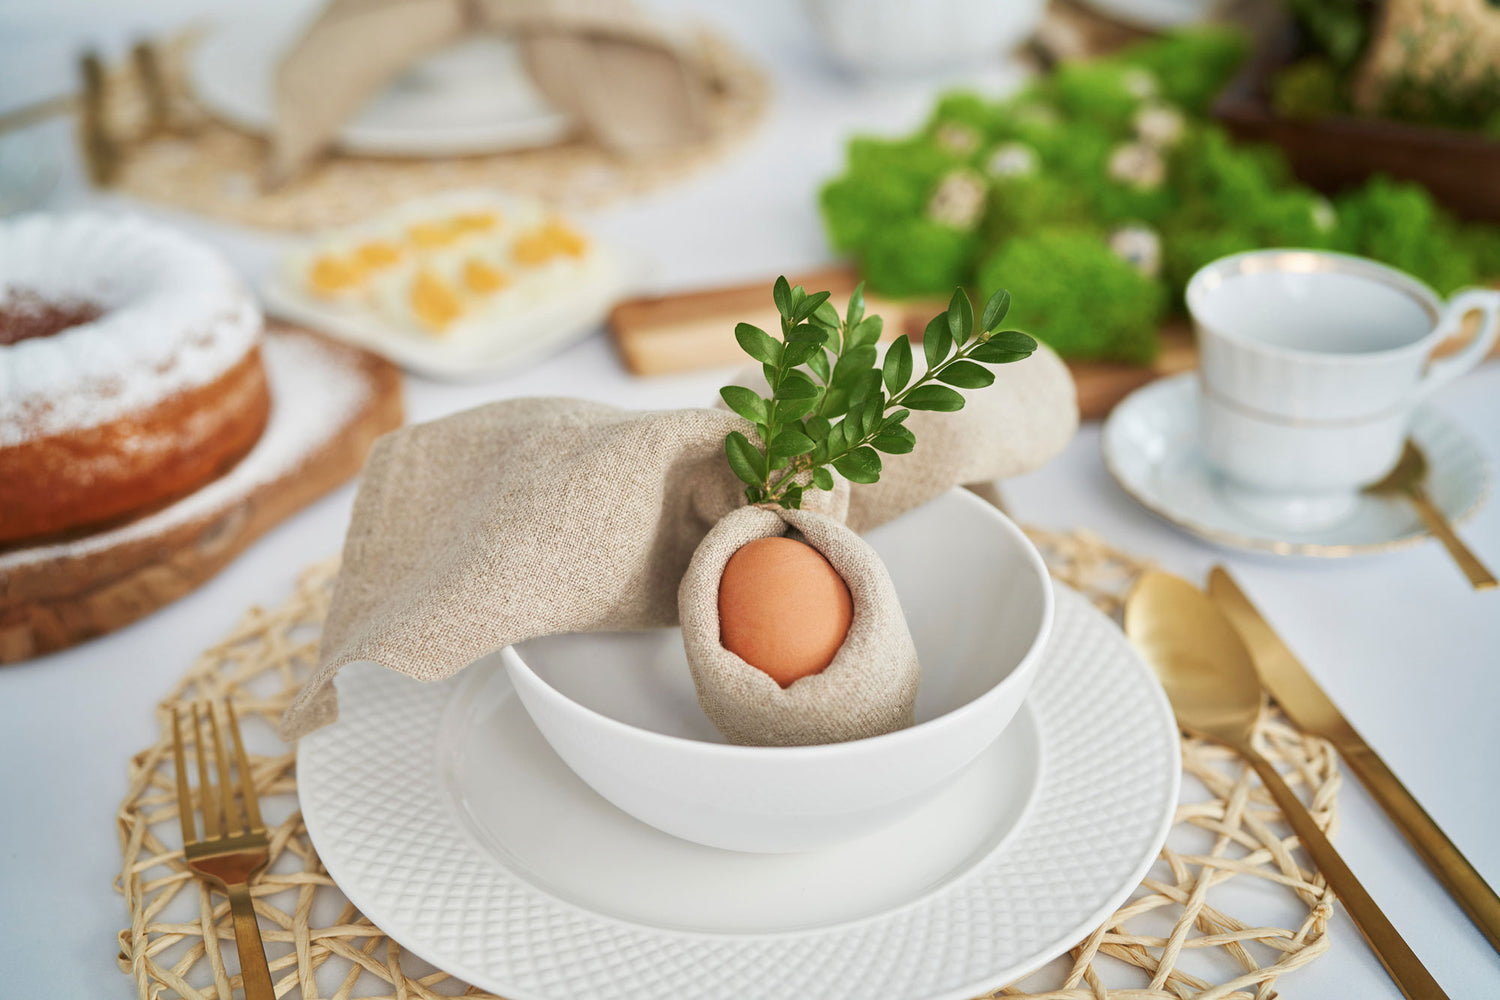 How To Elevate Easter Decor to Next Level